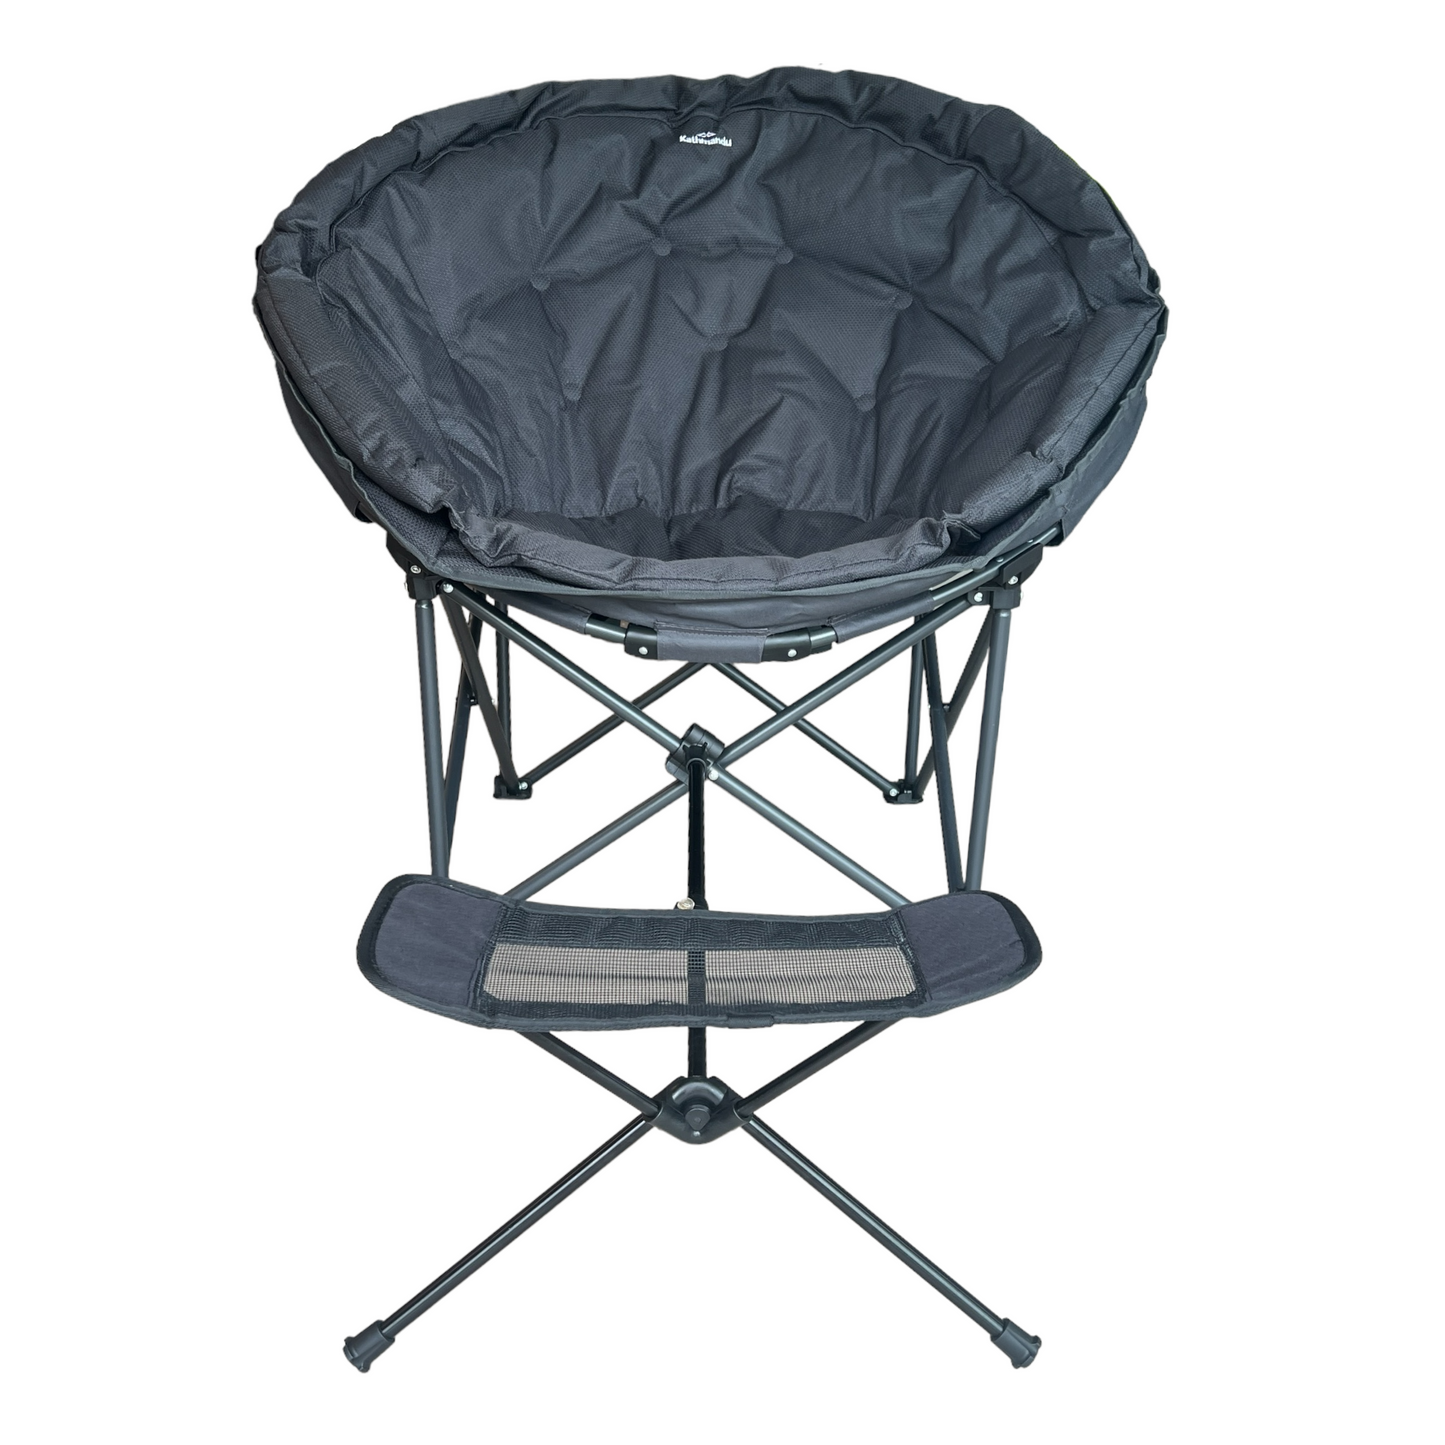 Portable Camping Chair Foot Rest